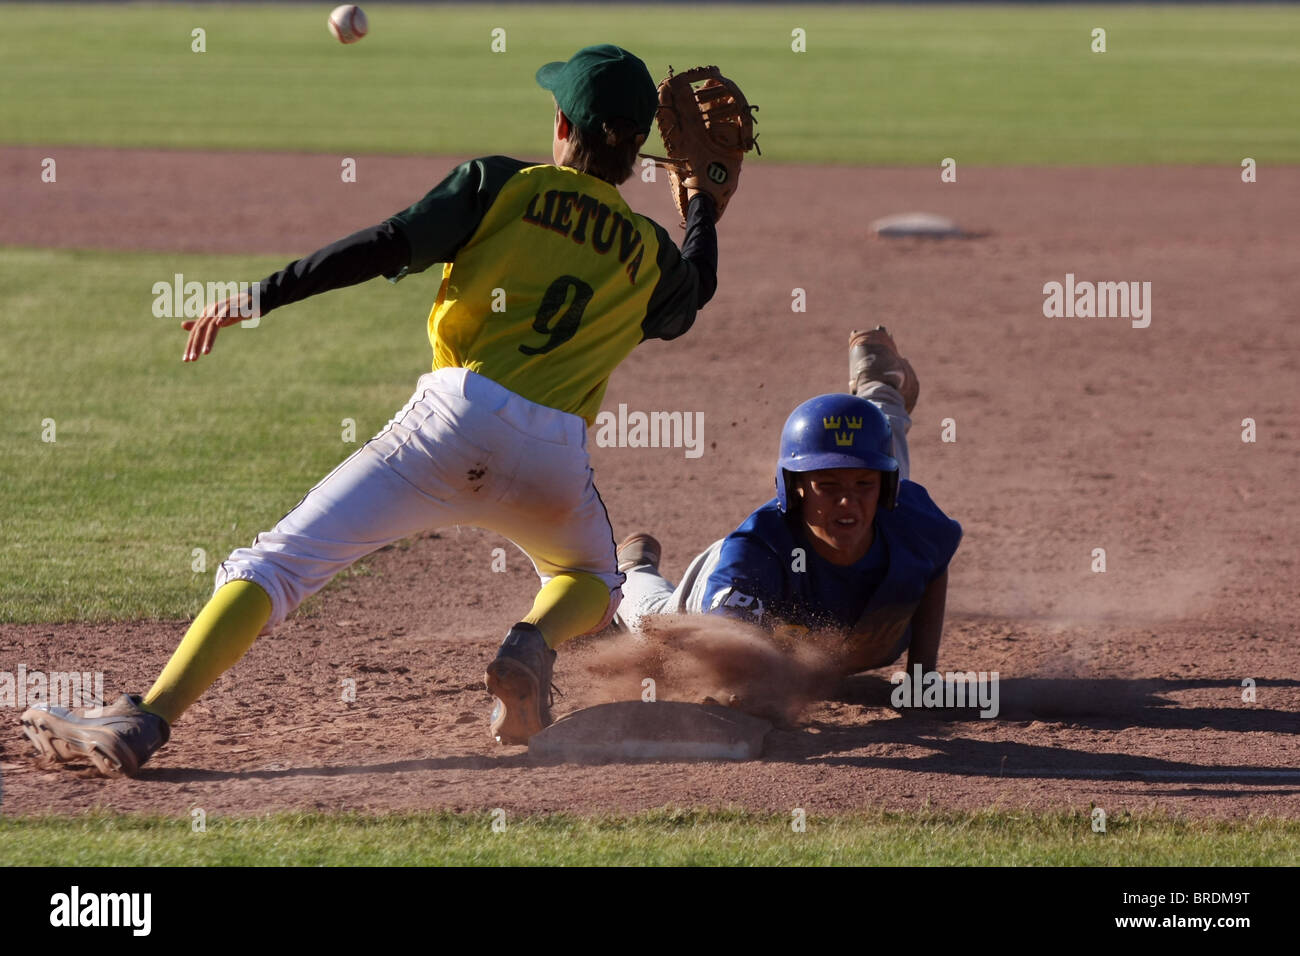 Cadet Qualifier for the European Championships of baseball for cadets. Lithuania beat Sweden by 11-7, but Sweden won the group. Stock Photo